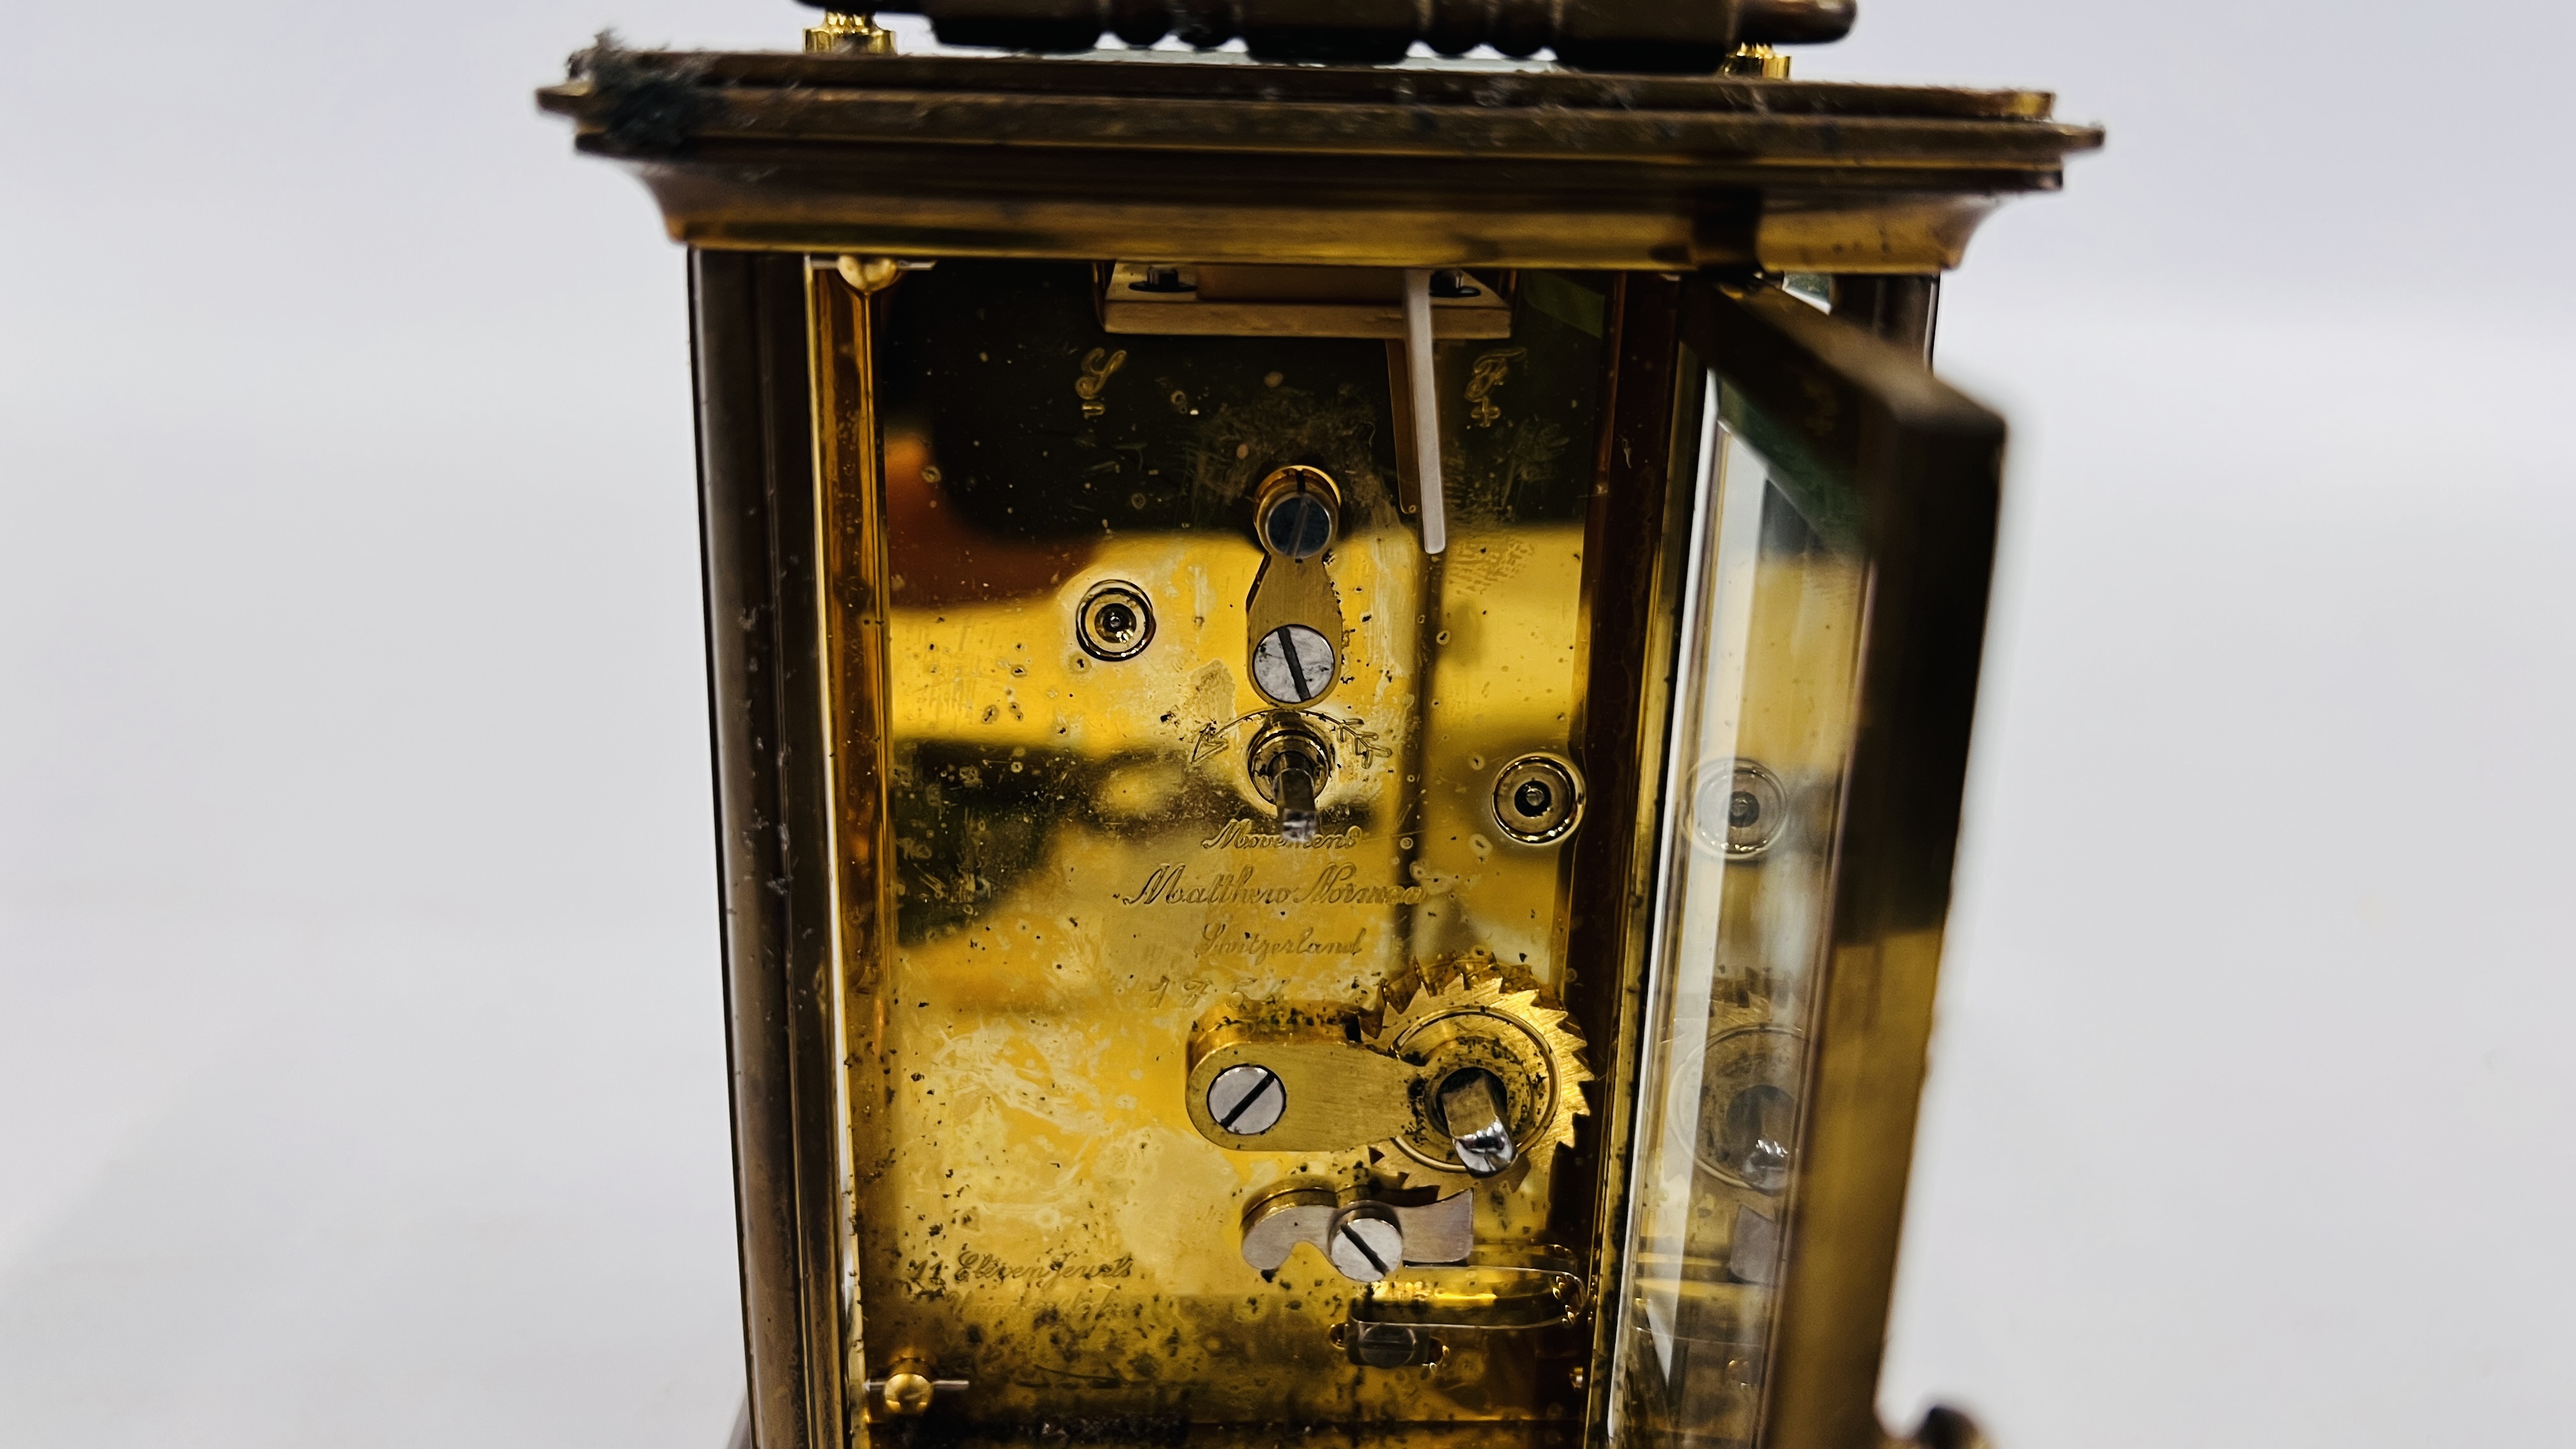 A MATTHEW NORMAN BRASS CASED CARRIAGE CLOCK WITH ORIGINAL BOX. - Image 8 of 9